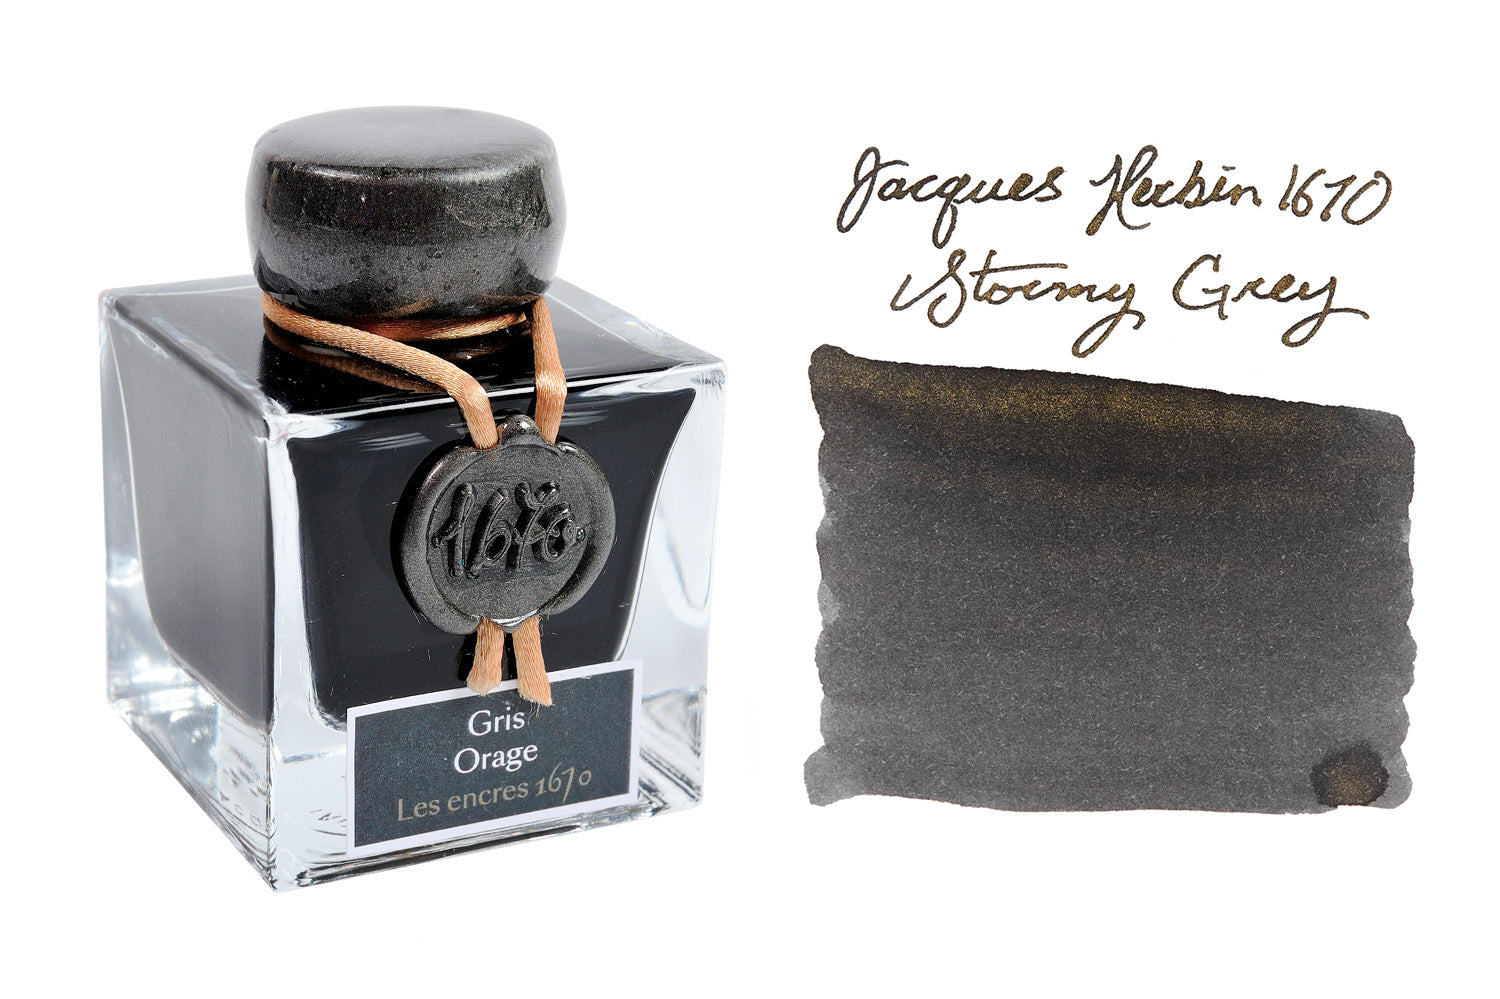 Jacques Herbin 1670 Stormy Grey fountain pen ink bottle and swab on white background